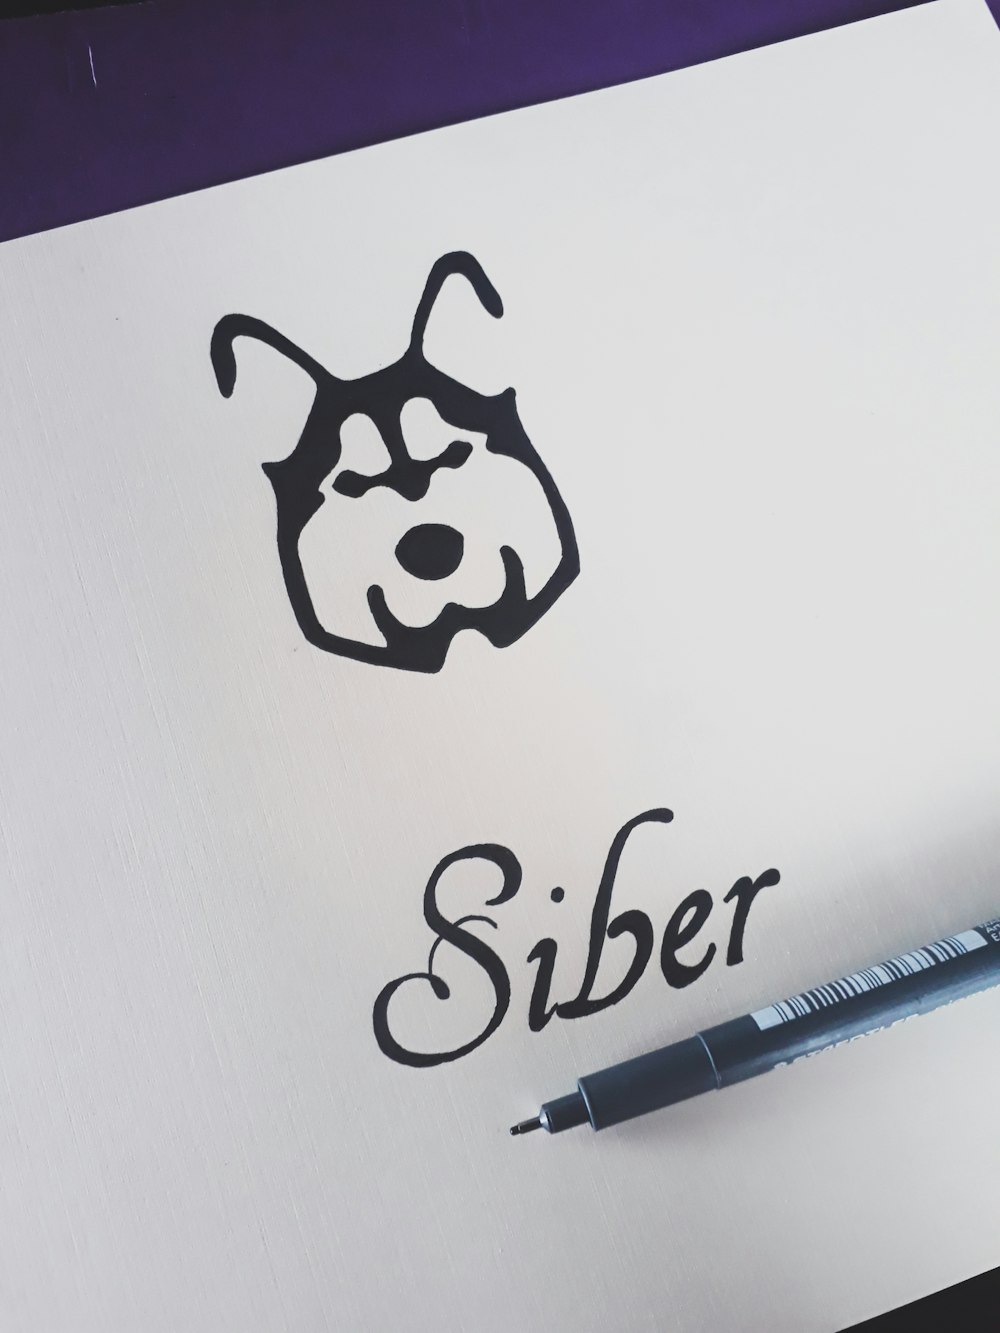 An animal with "Siber," written below on a piece of paper.